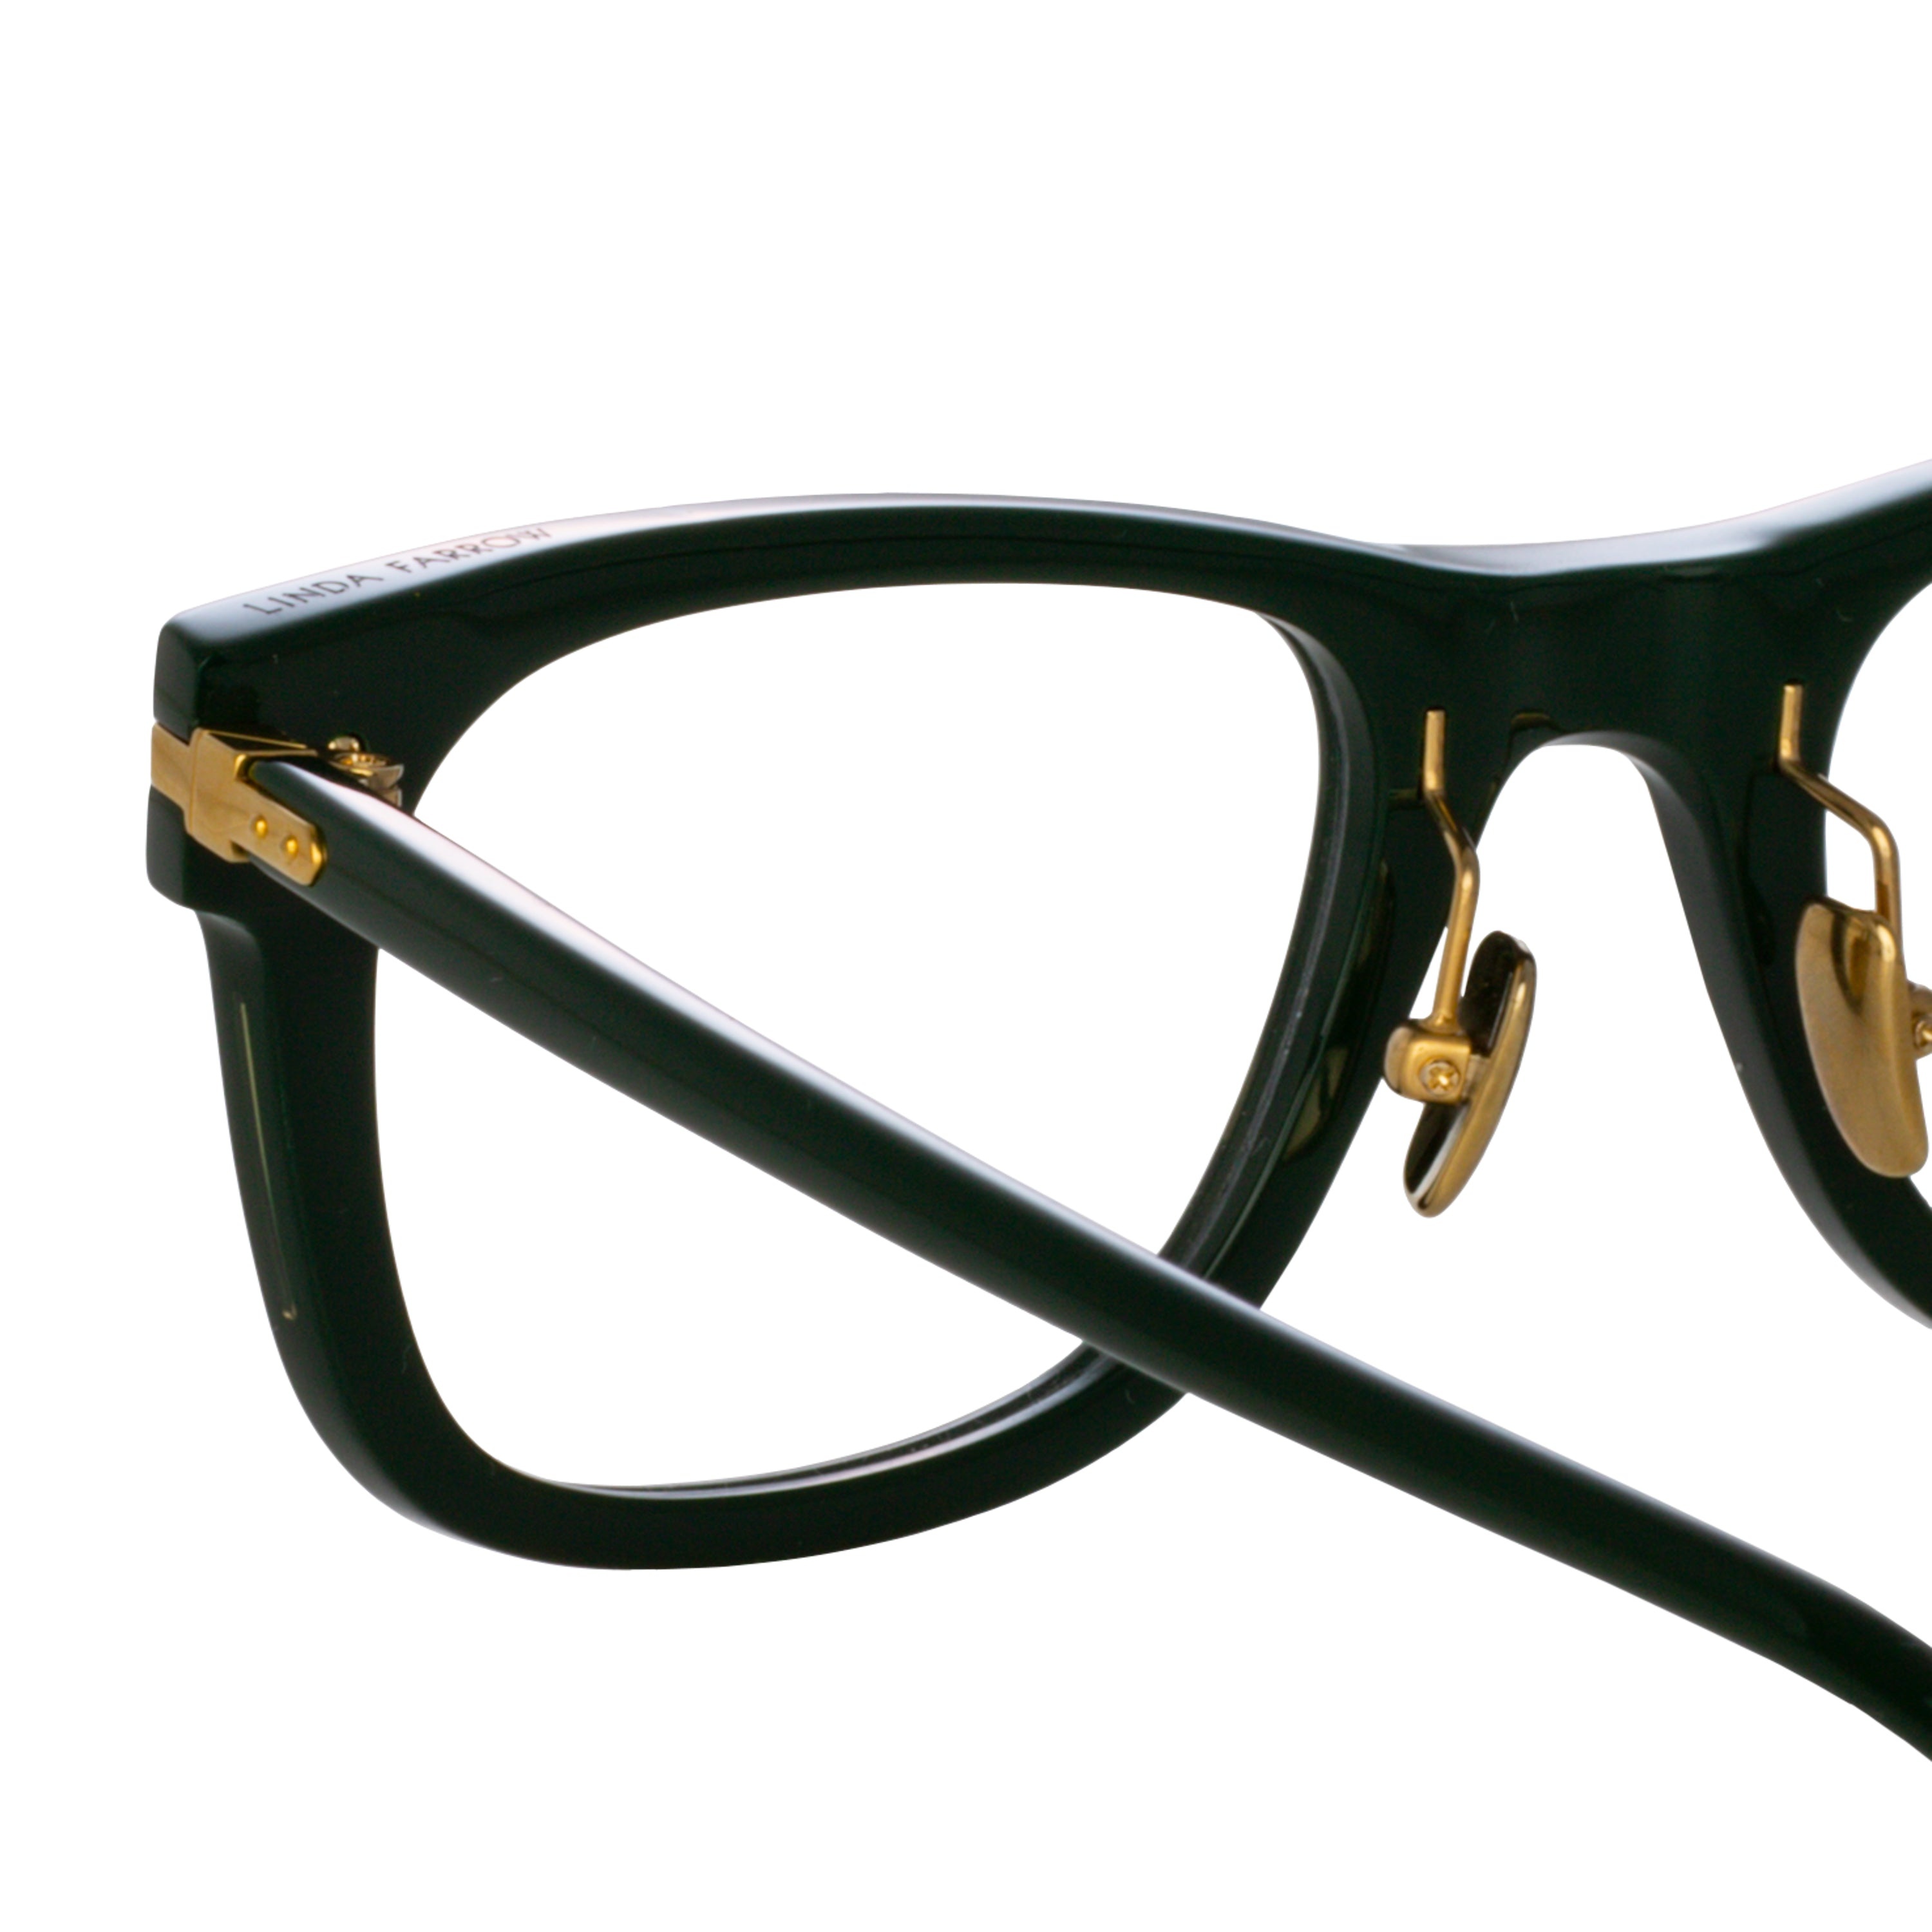 MEN'S PORTICO OPTICAL D-FRAME IN FOREST GREEN (ASIAN FIT) - 5